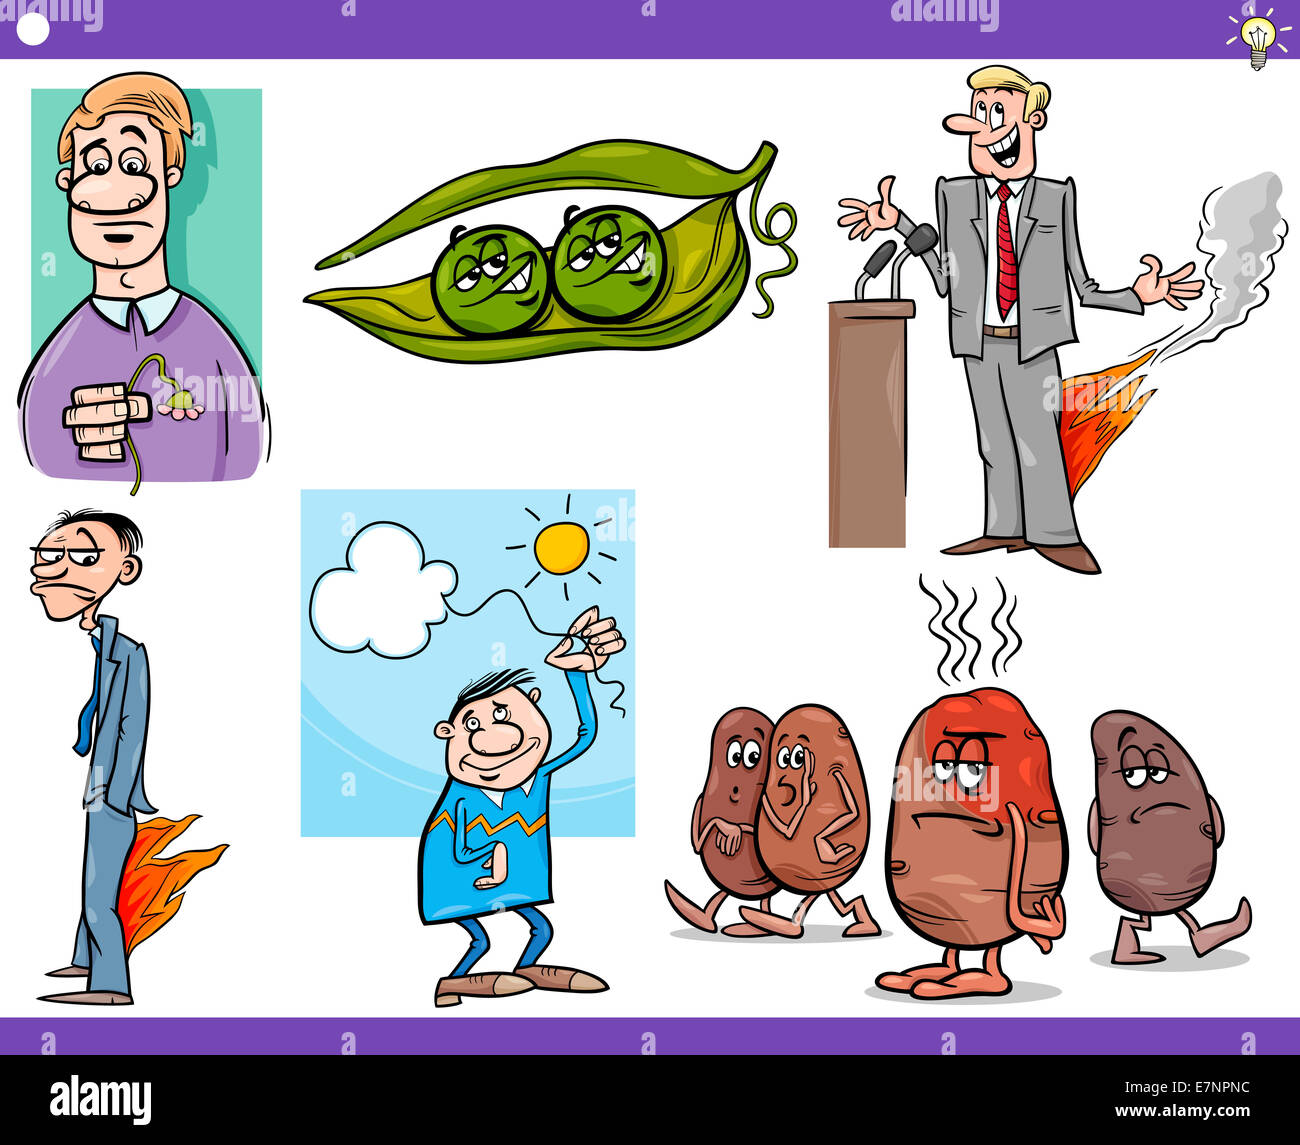 Illustration Set of Humorous Cartoon Concepts or Ideas and Metaphors with Funny Characters Stock Photo